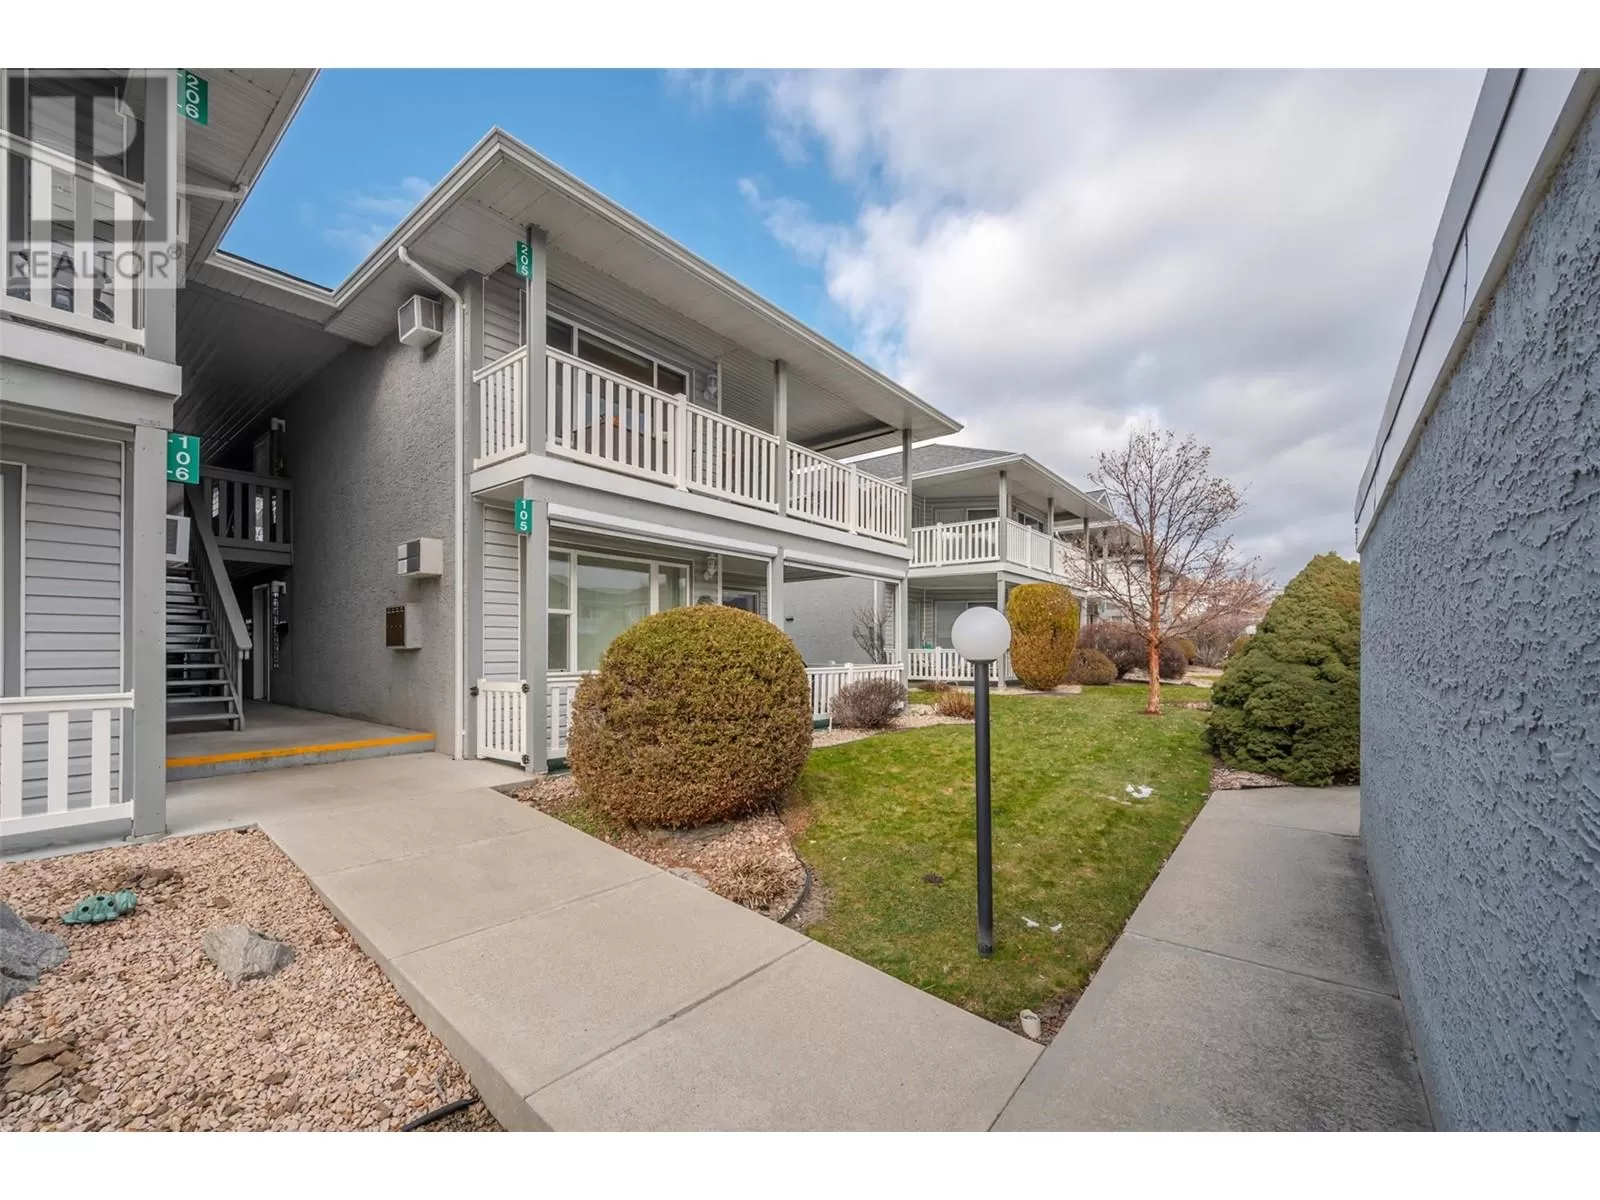 Row / Townhouse for rent: 62 Dauphin Avenue Unit# 205, Penticton, British Columbia V2A 6V8